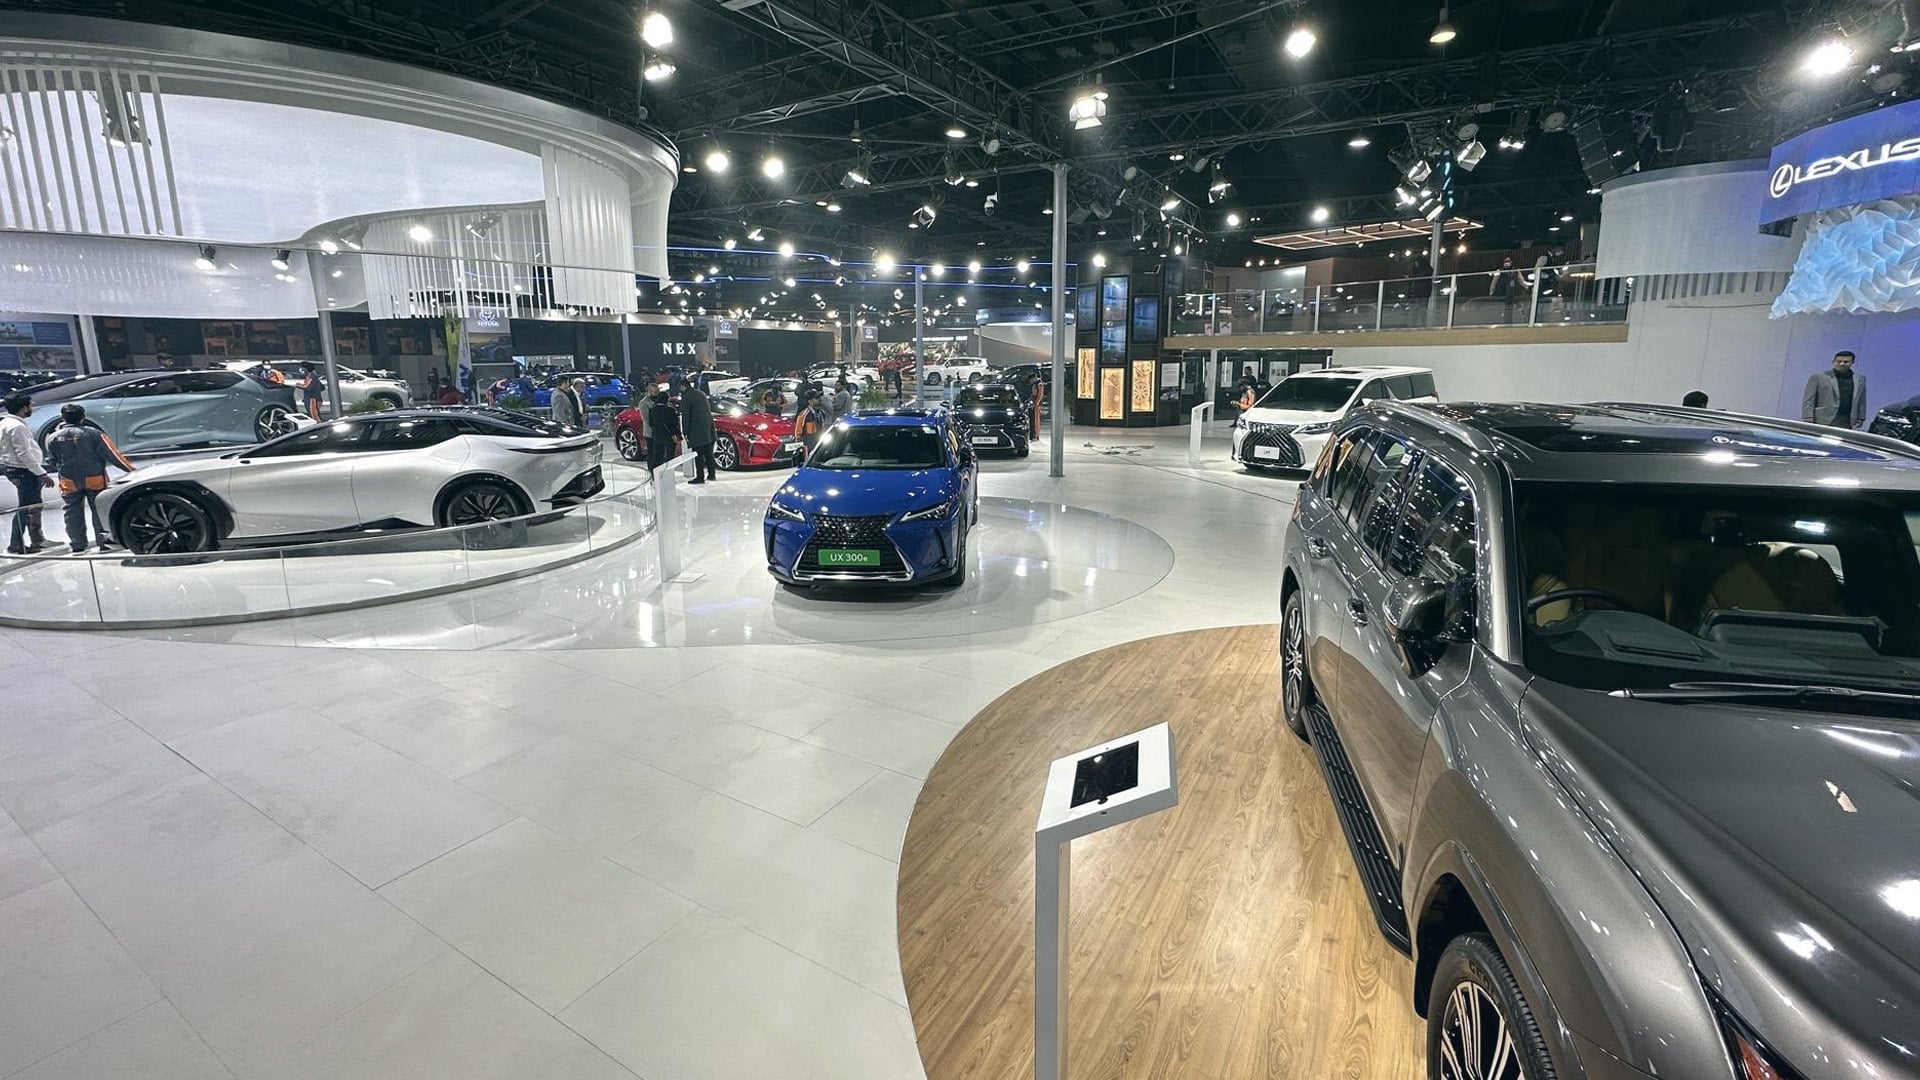 Auto Expo 2023 - Components Show sees largest-ever footfall: CII